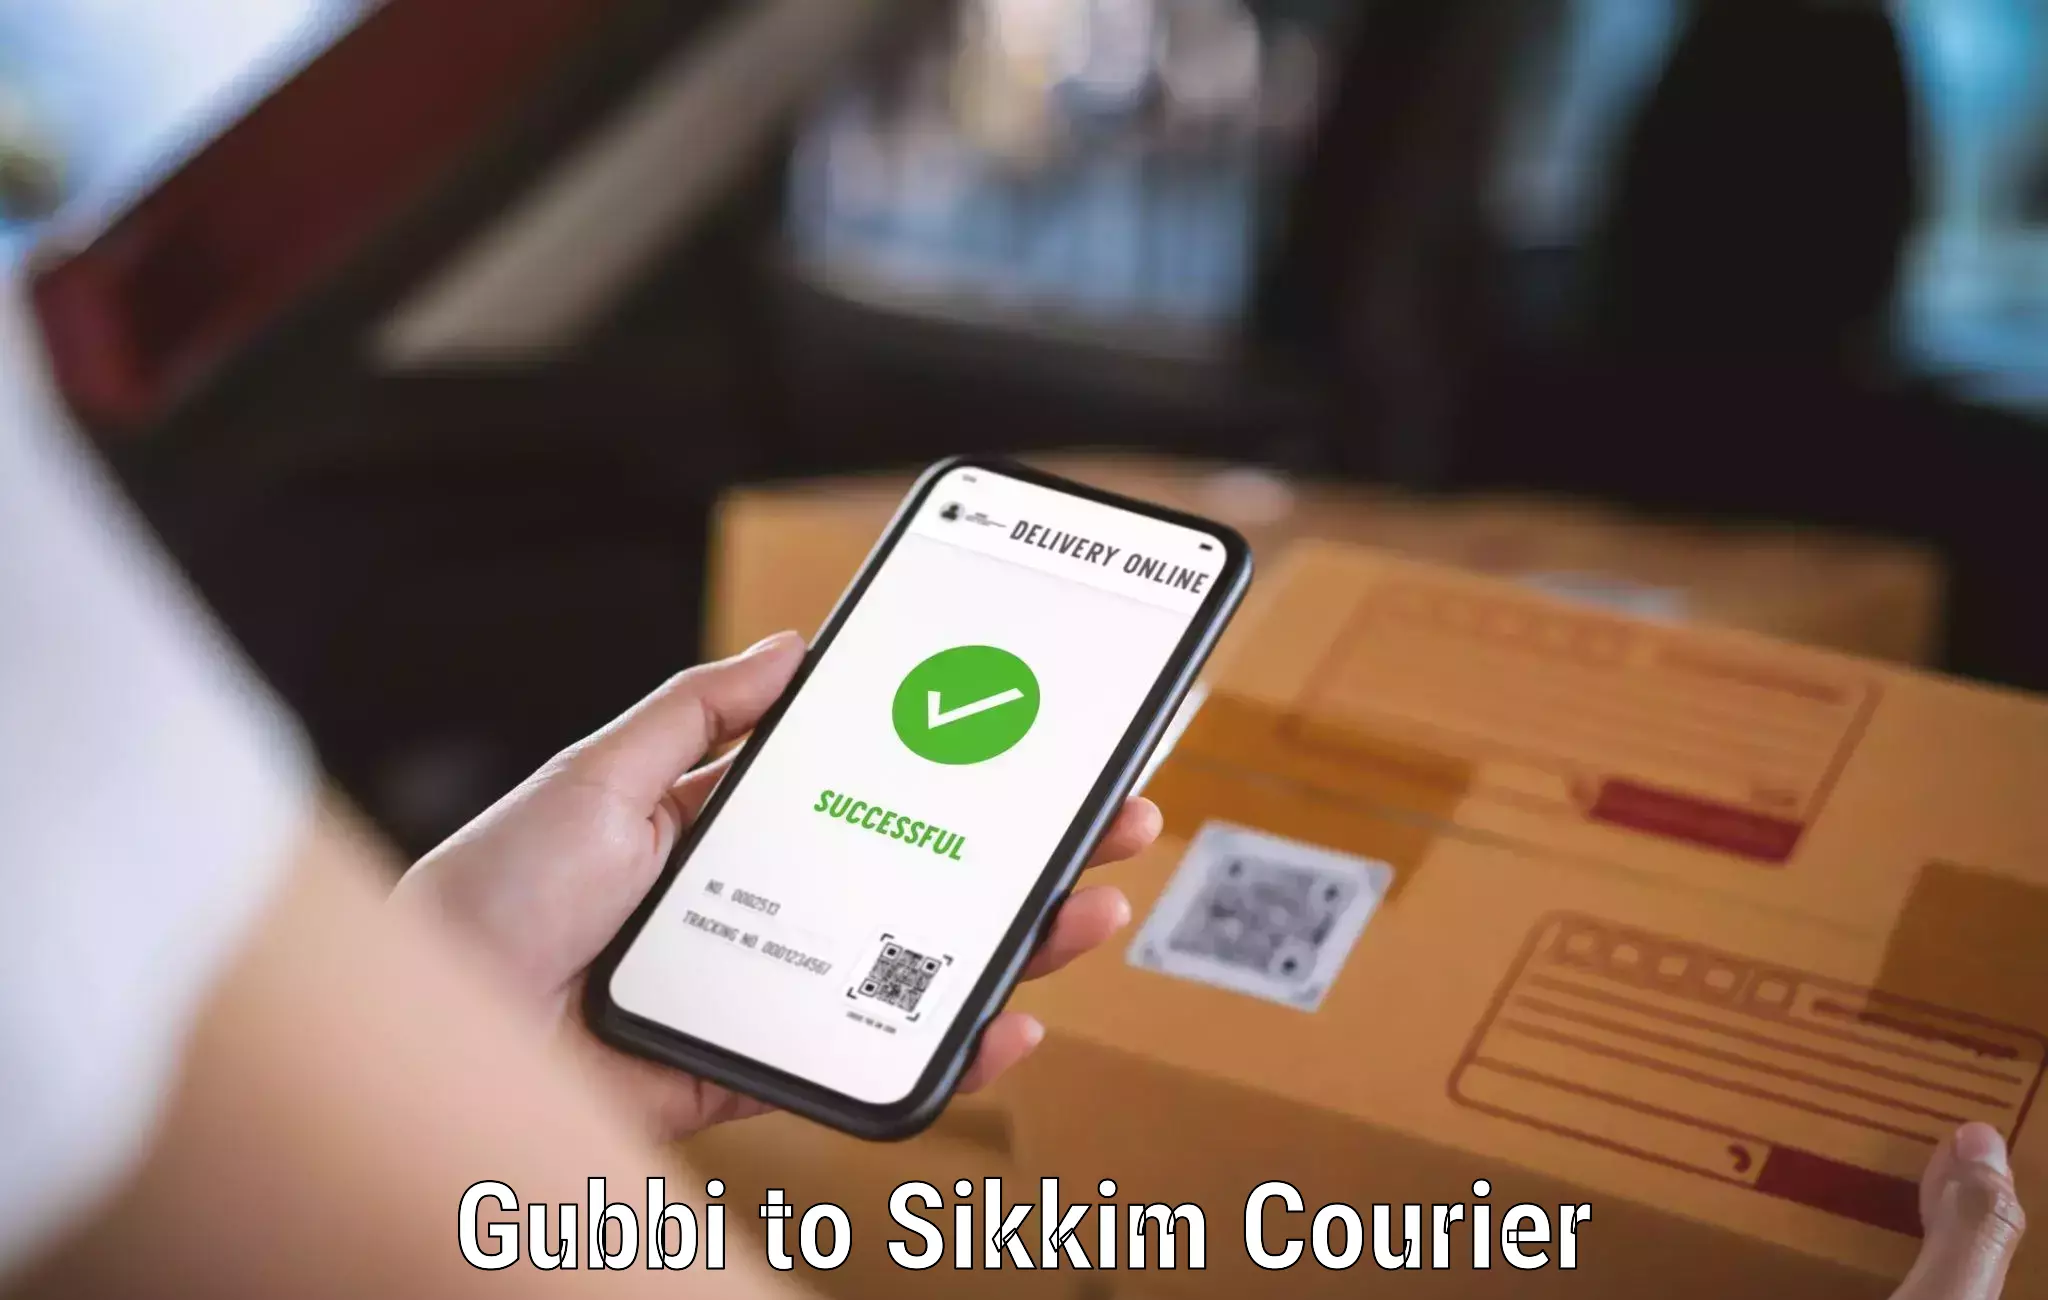 Flexible delivery schedules in Gubbi to Sikkim